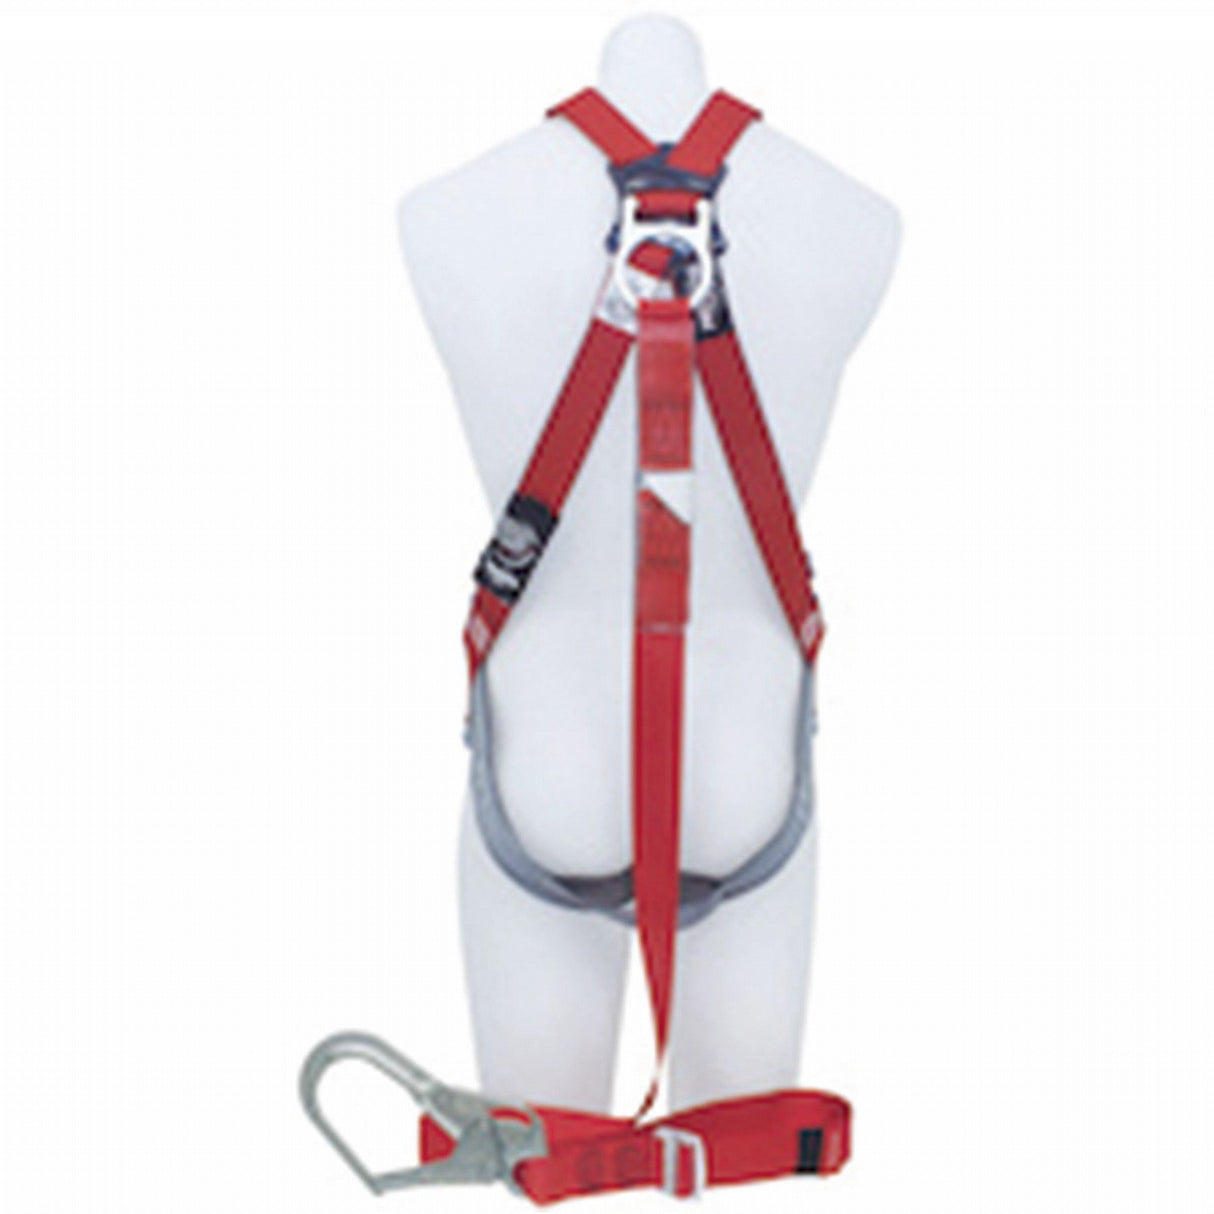 Protecta PRO Riggers Harness with Adjustable Integral Lanyard & Scaffold Hook